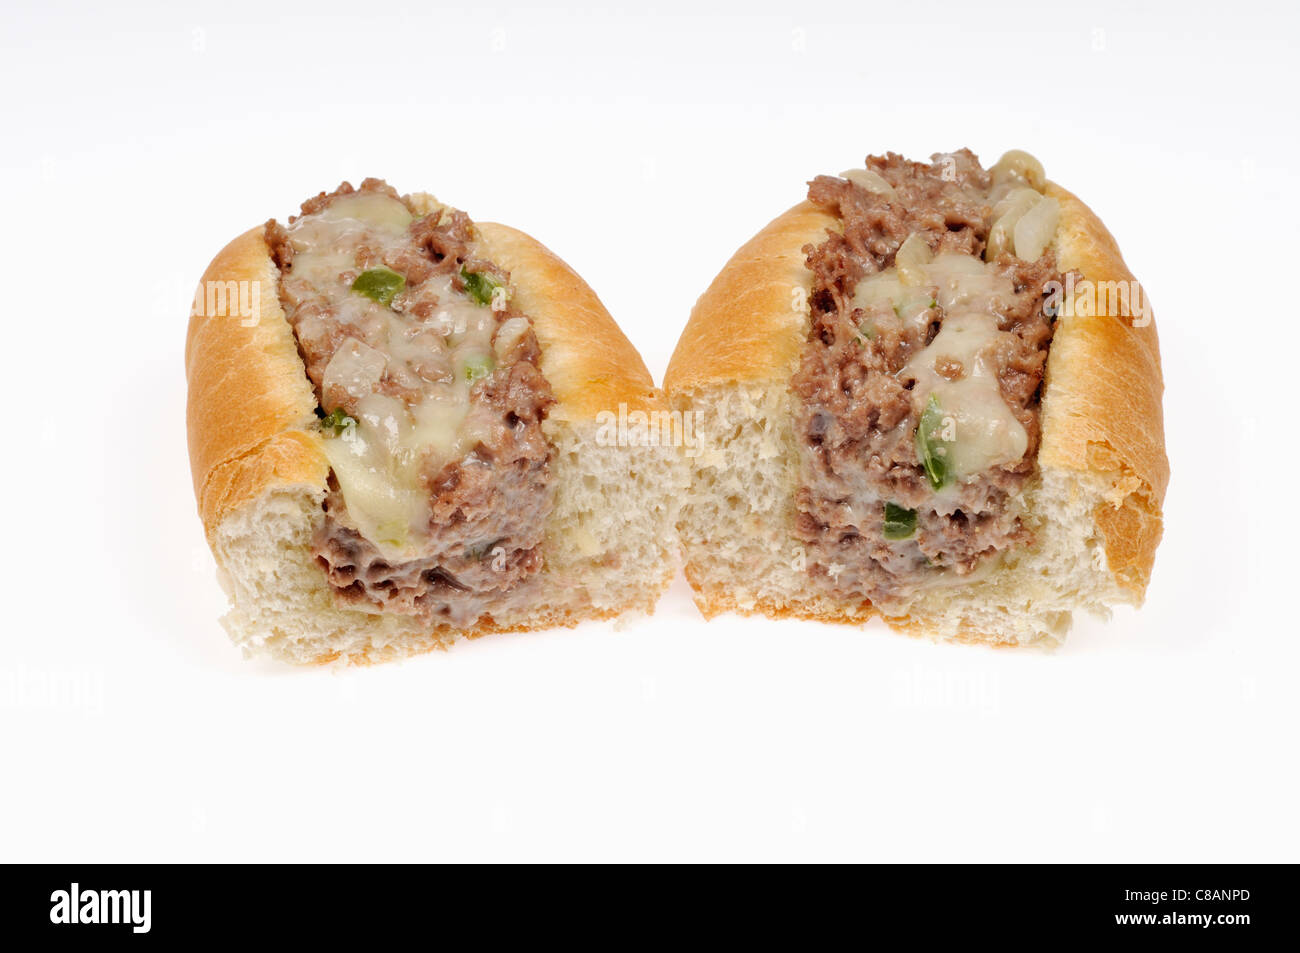 Philly cheesesteak cut in half on white background, cut out. Stock Photo